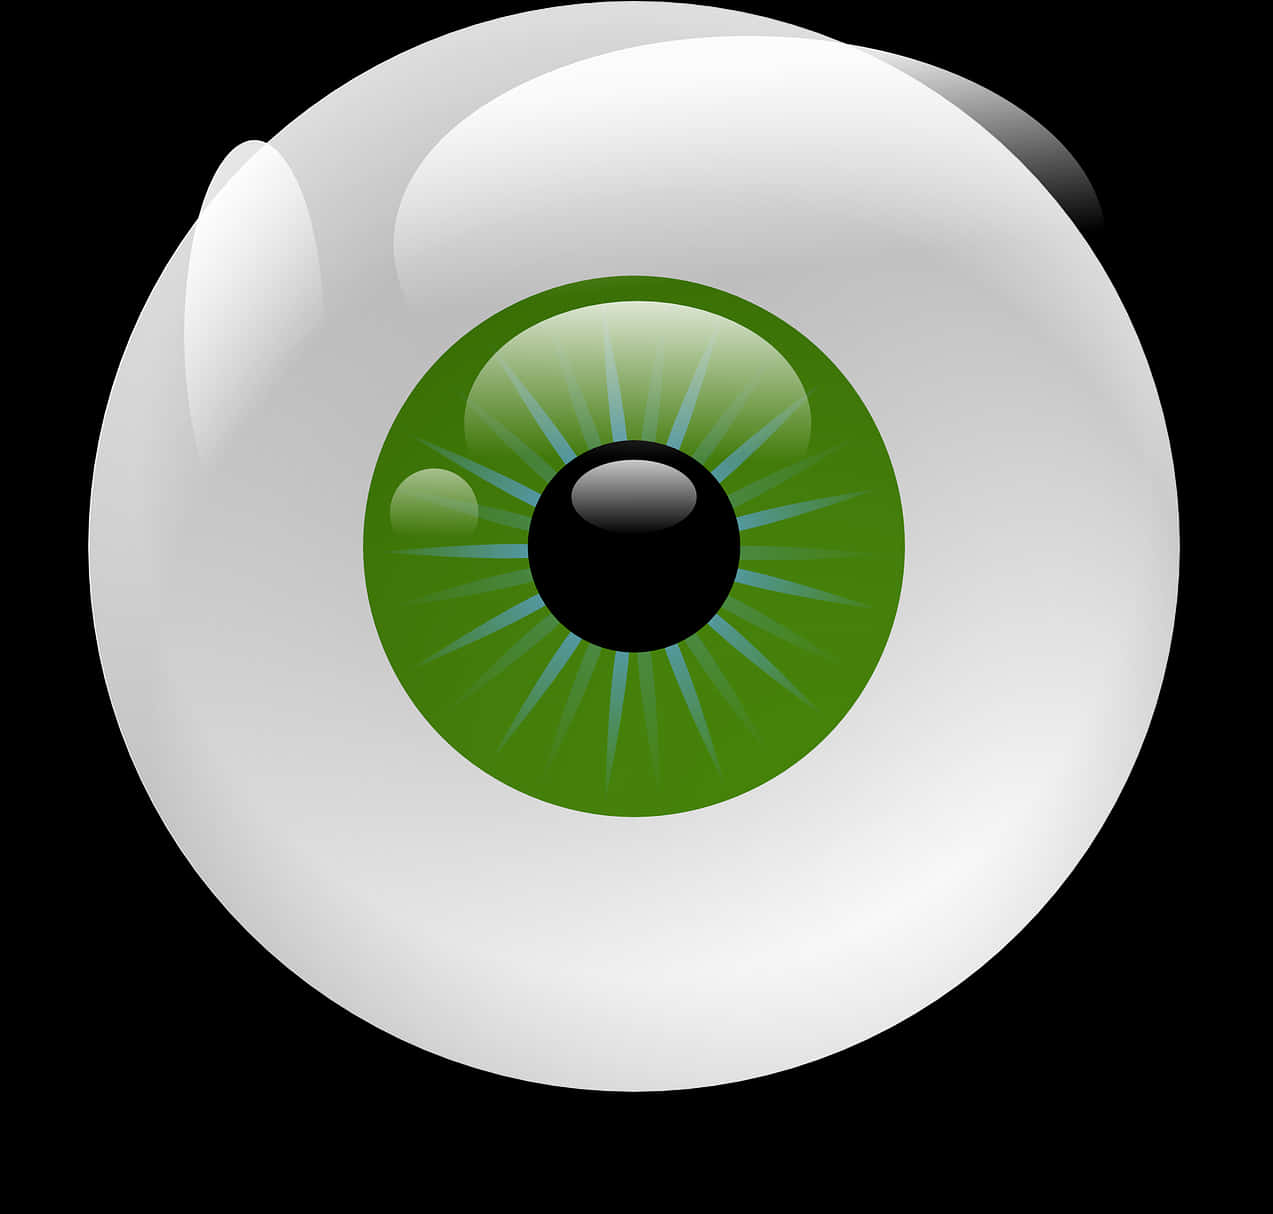 A Green Eyeball With Blue Pupil